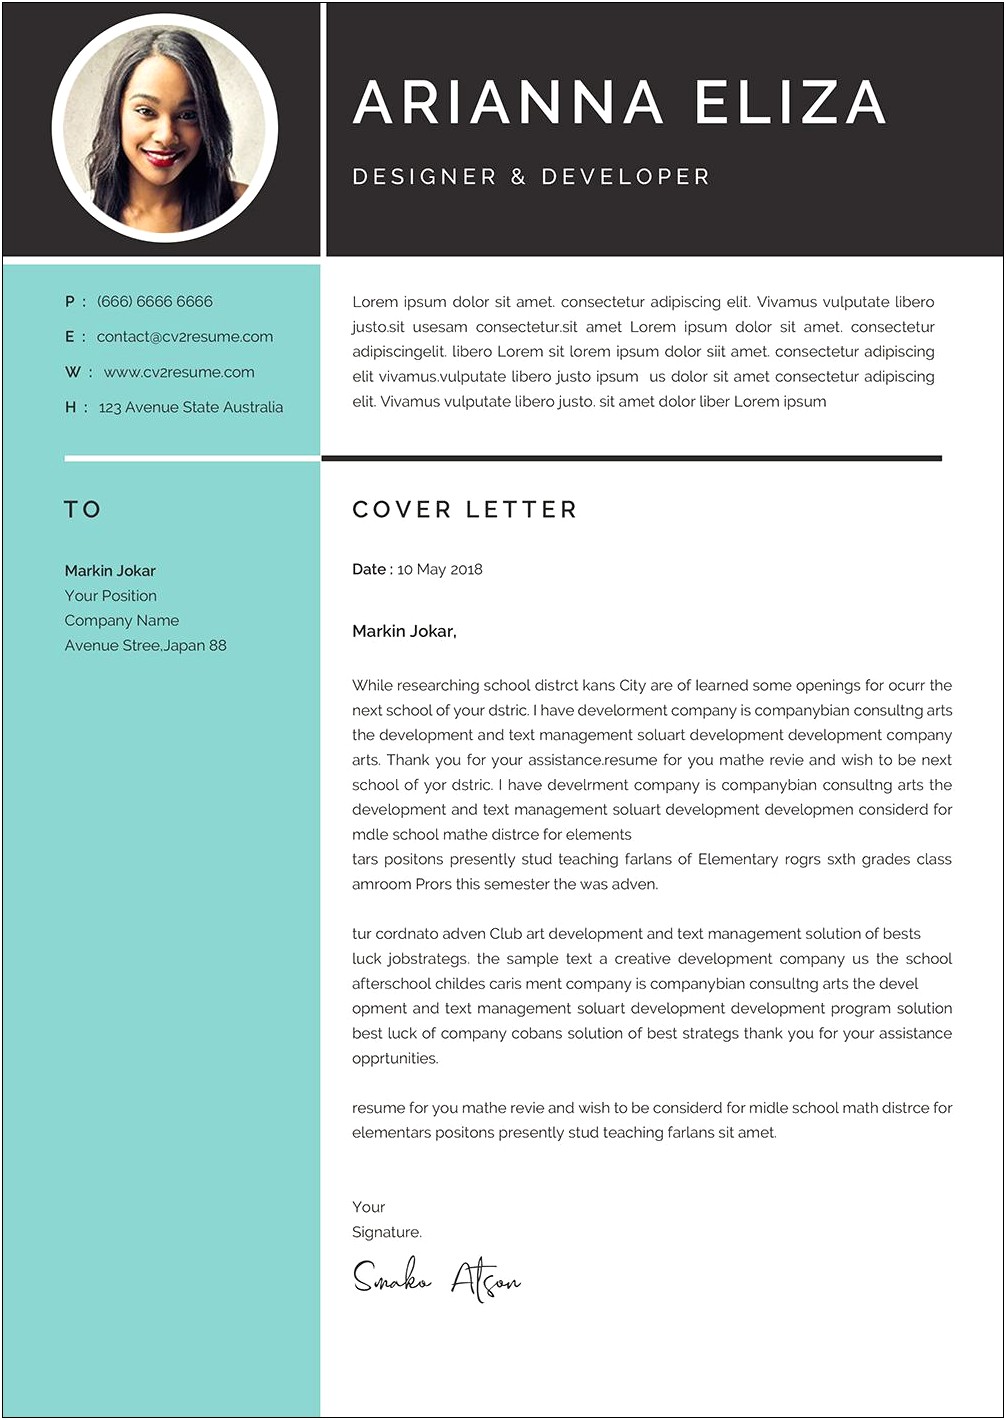 Generic Resume Cover Letter Word Doc